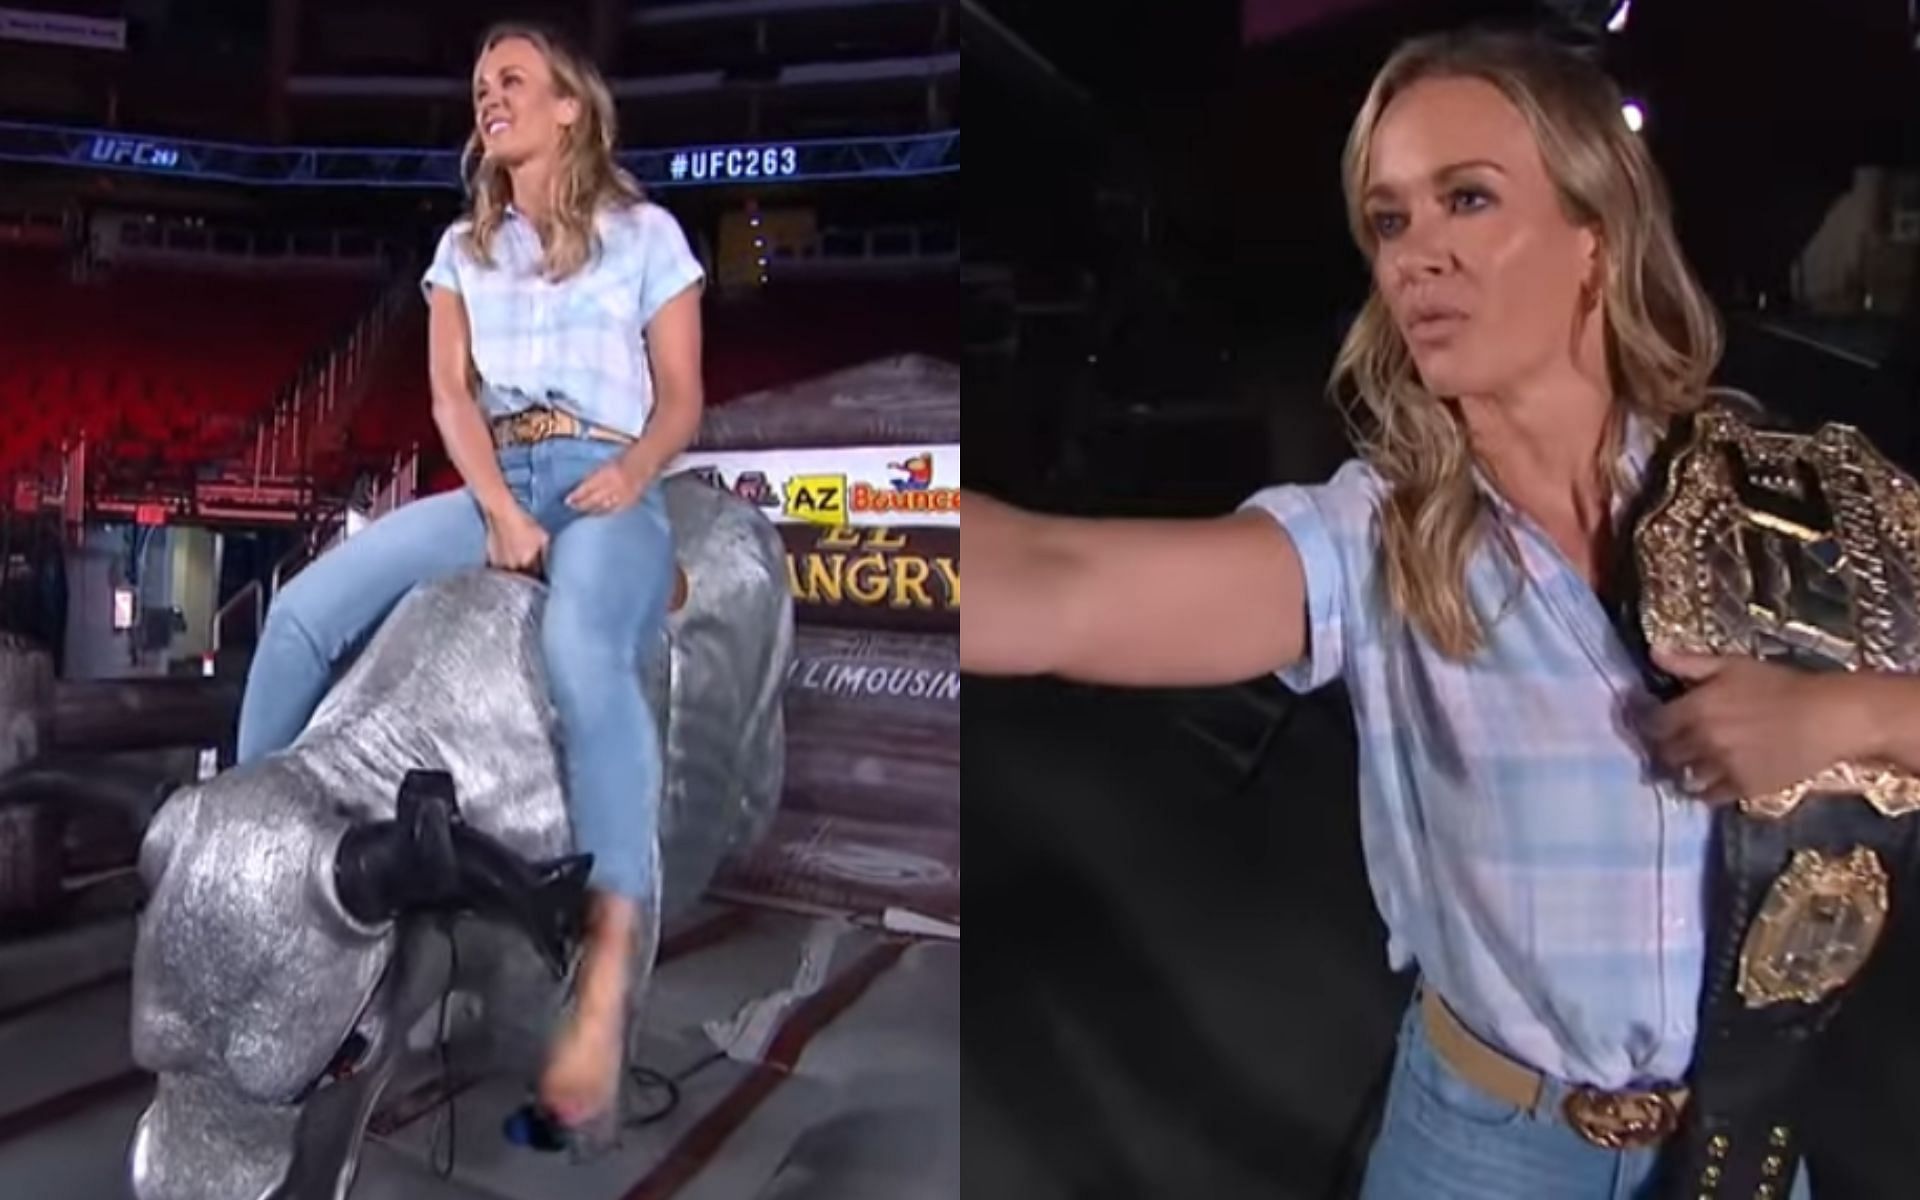 Laura Sanko wins bull riding competition at UFC 263 in 2021